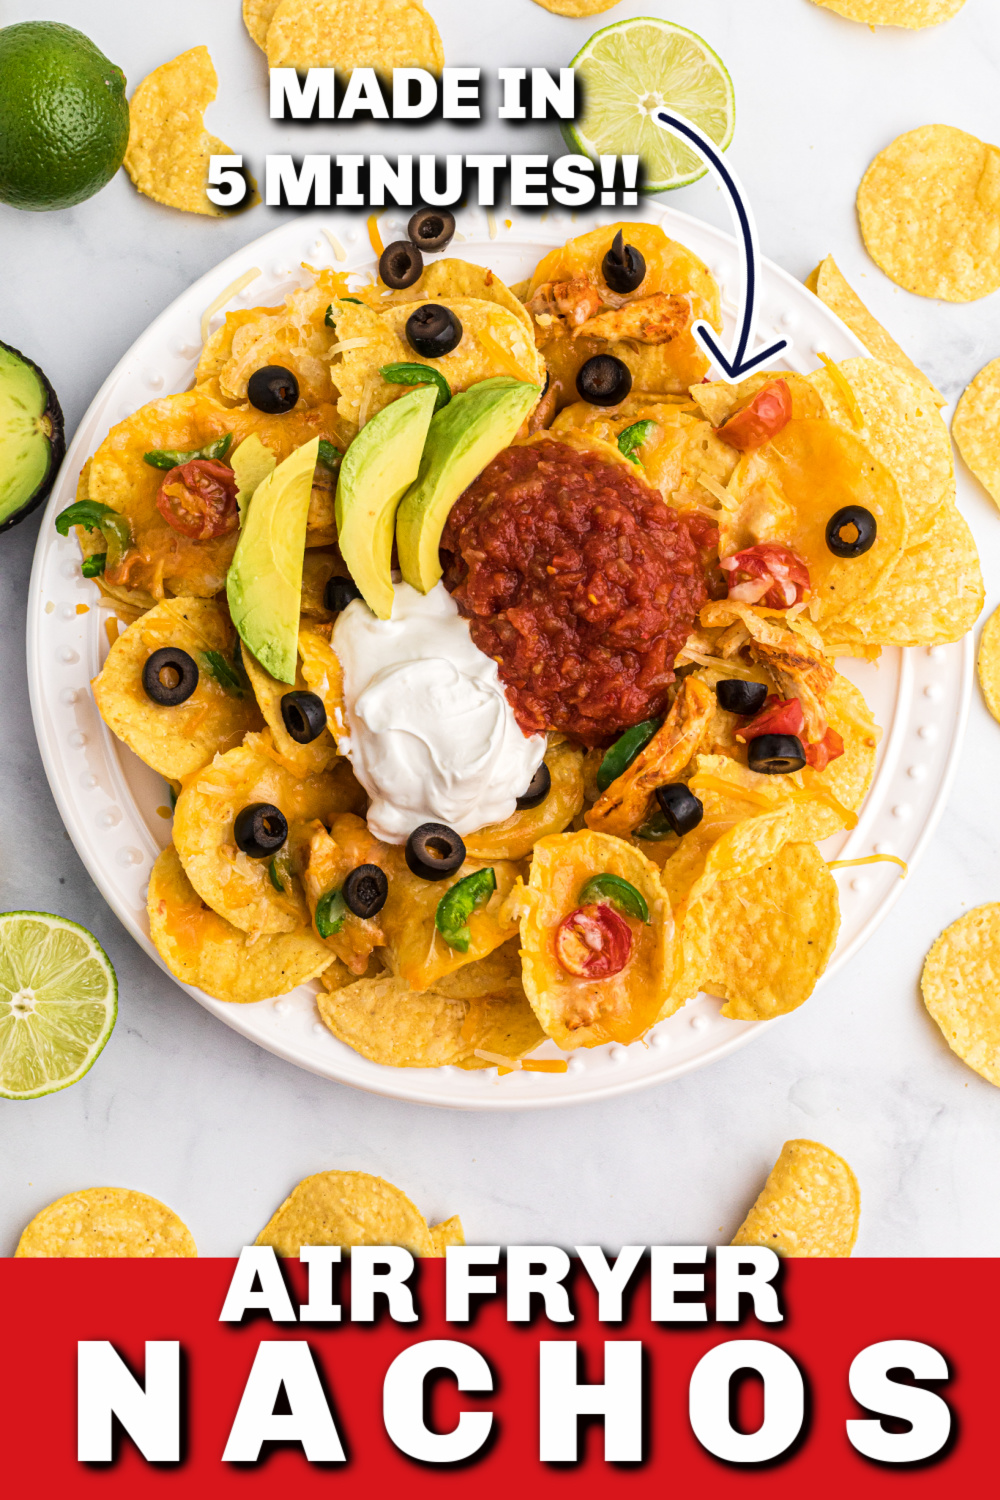 Air Fryer Nachos are loaded with cheese and chicken and done in just 5 minutes! Made with nacho round chips, fajita chicken meat, shredded cheese, sliced jalapenos, and more. You'll love how quick and easy this easy air fryer recipe can be, and your guests will devour it.